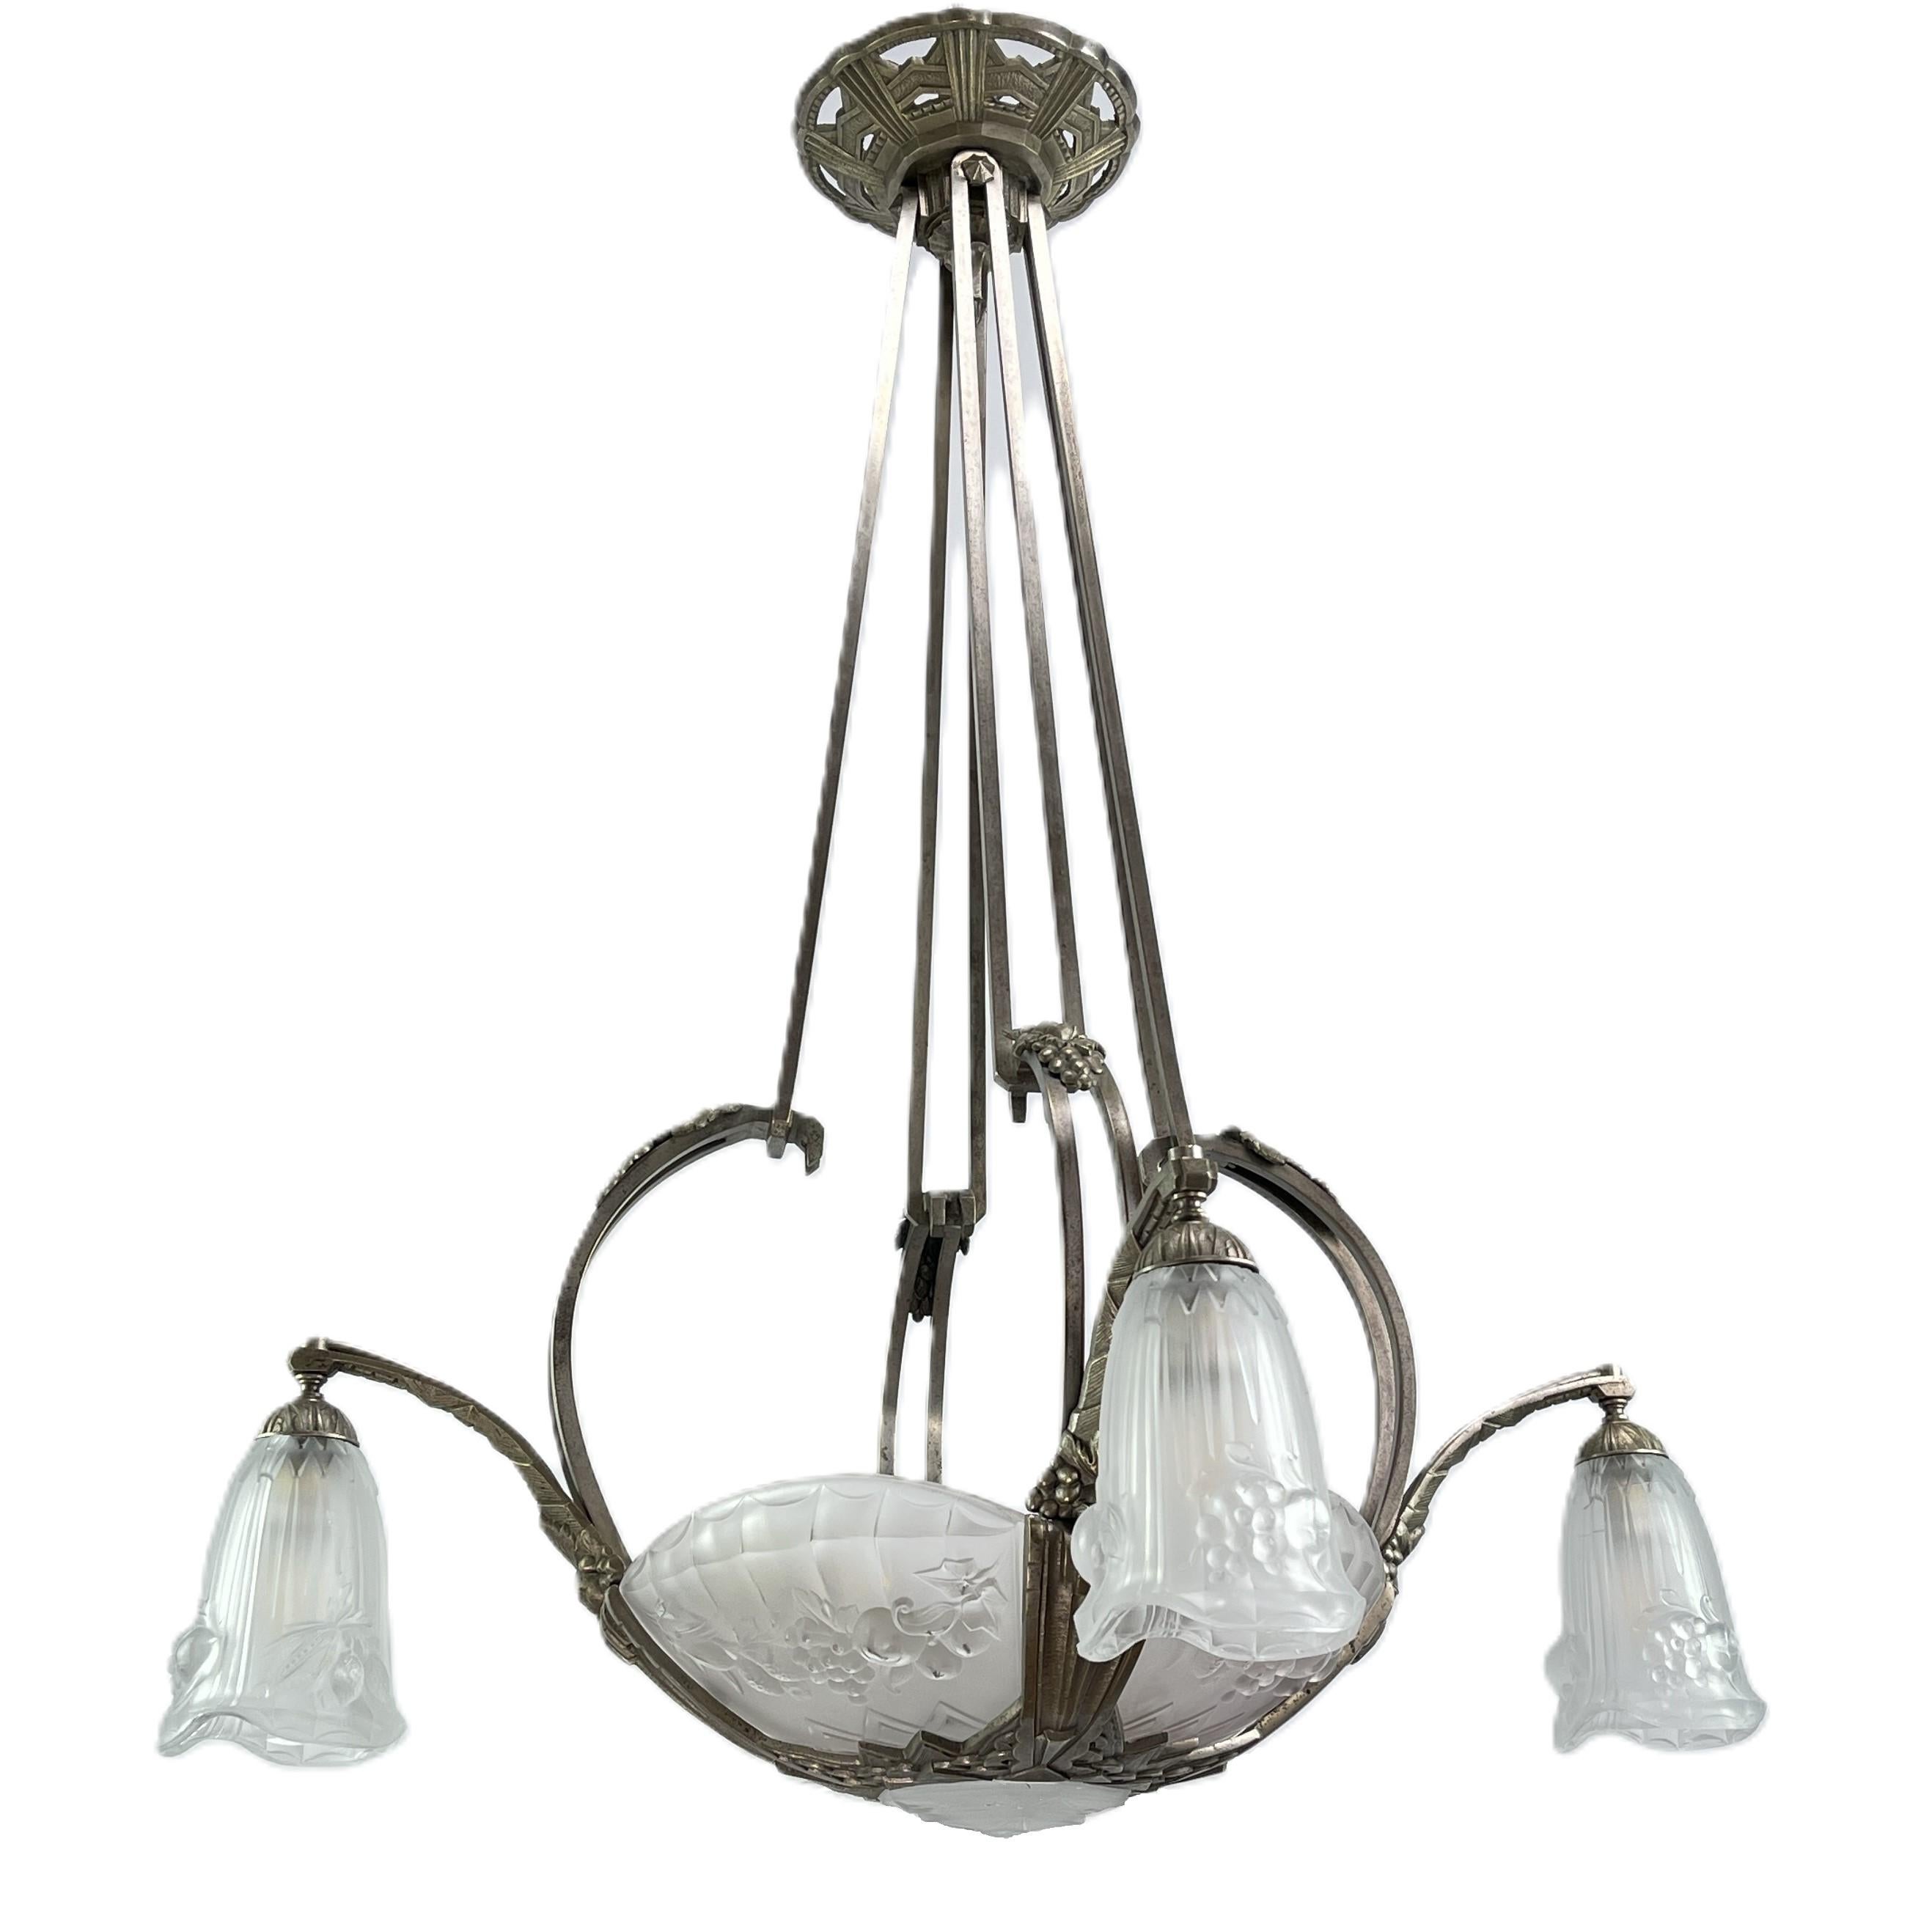 French Art Deco Chandelier Hanging Lamp by P. Gilles France, 1920s For Sale